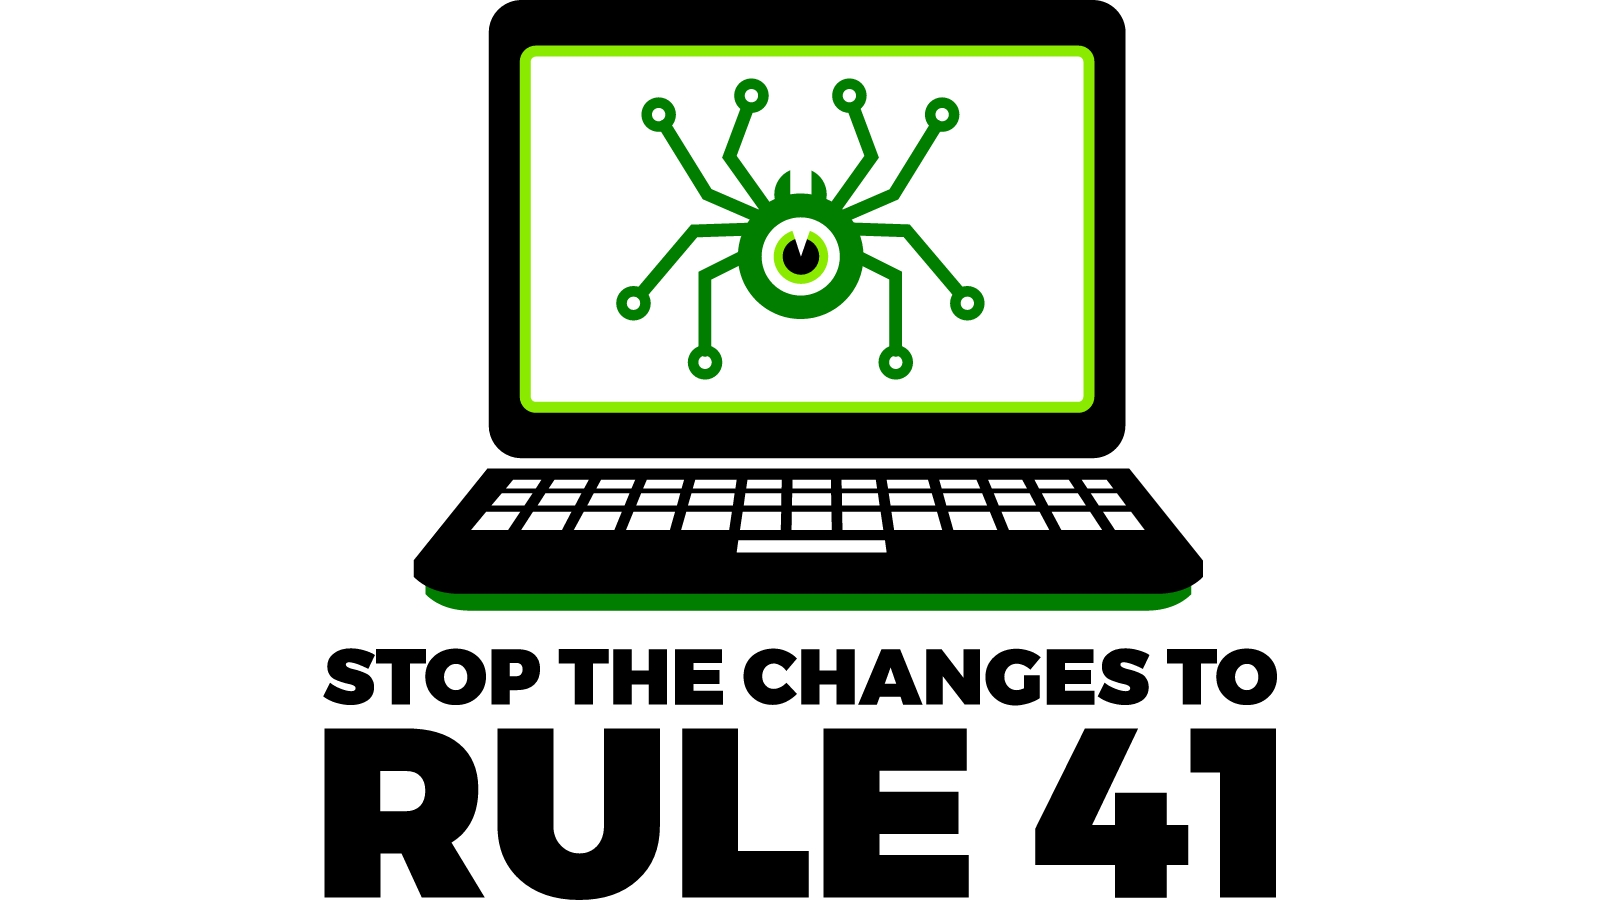 DON'T LET THE U.S. GOVERNMENT HACK OUR COMPUTERS - STOP THE CHANGES TO RULE 41